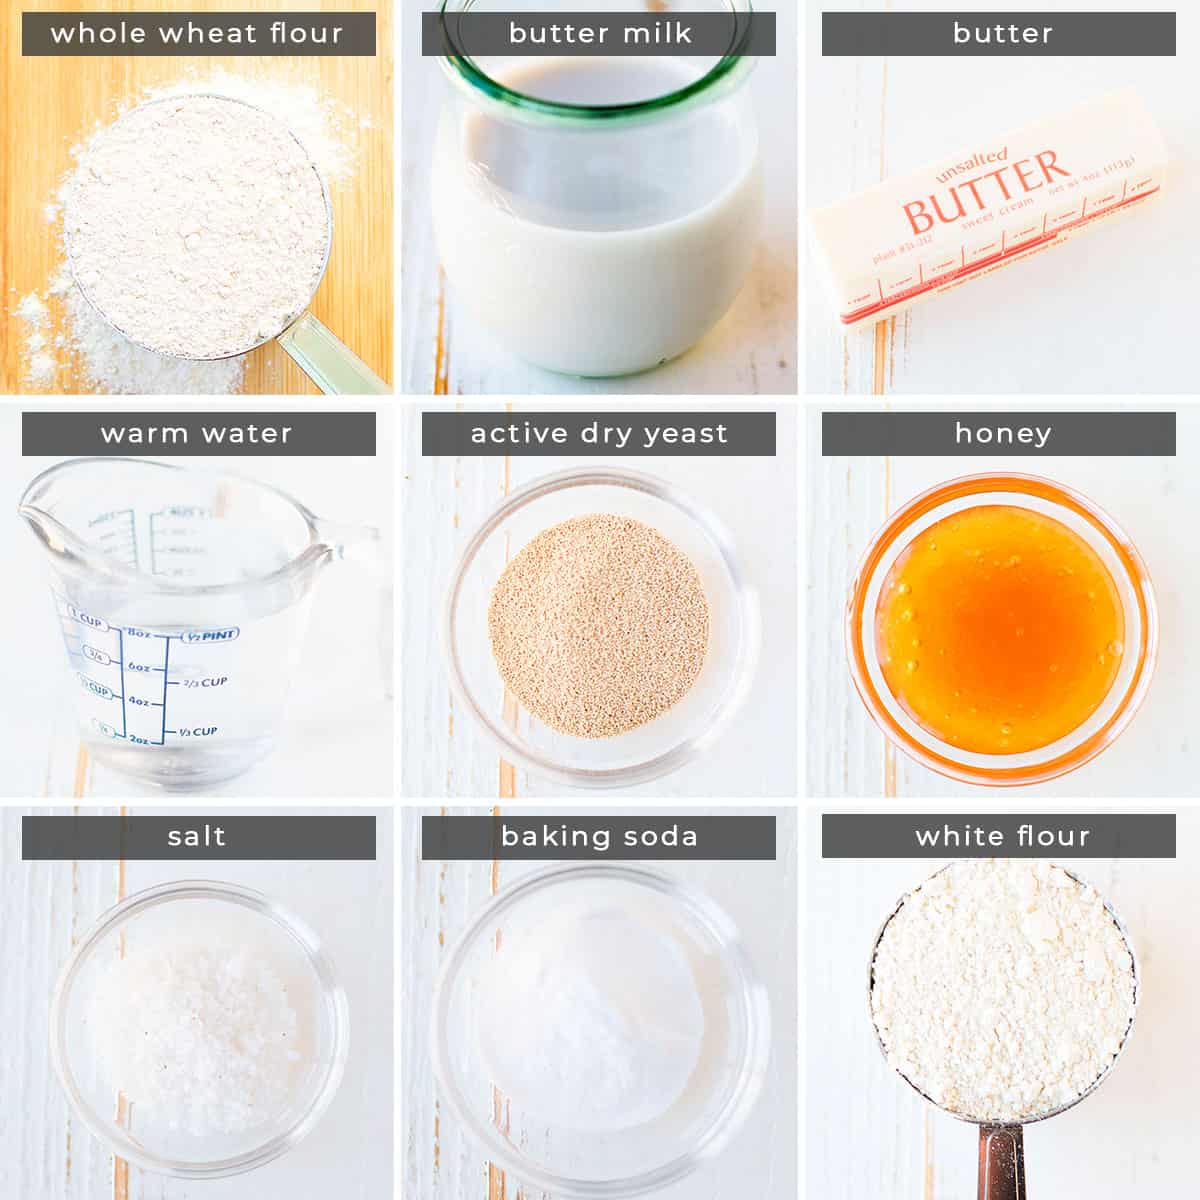 Image containing recipe ingredients whole wheat flour, buttermilk, butter, warm water, active dry yeast, honey, salt, baking soda, and white flour.